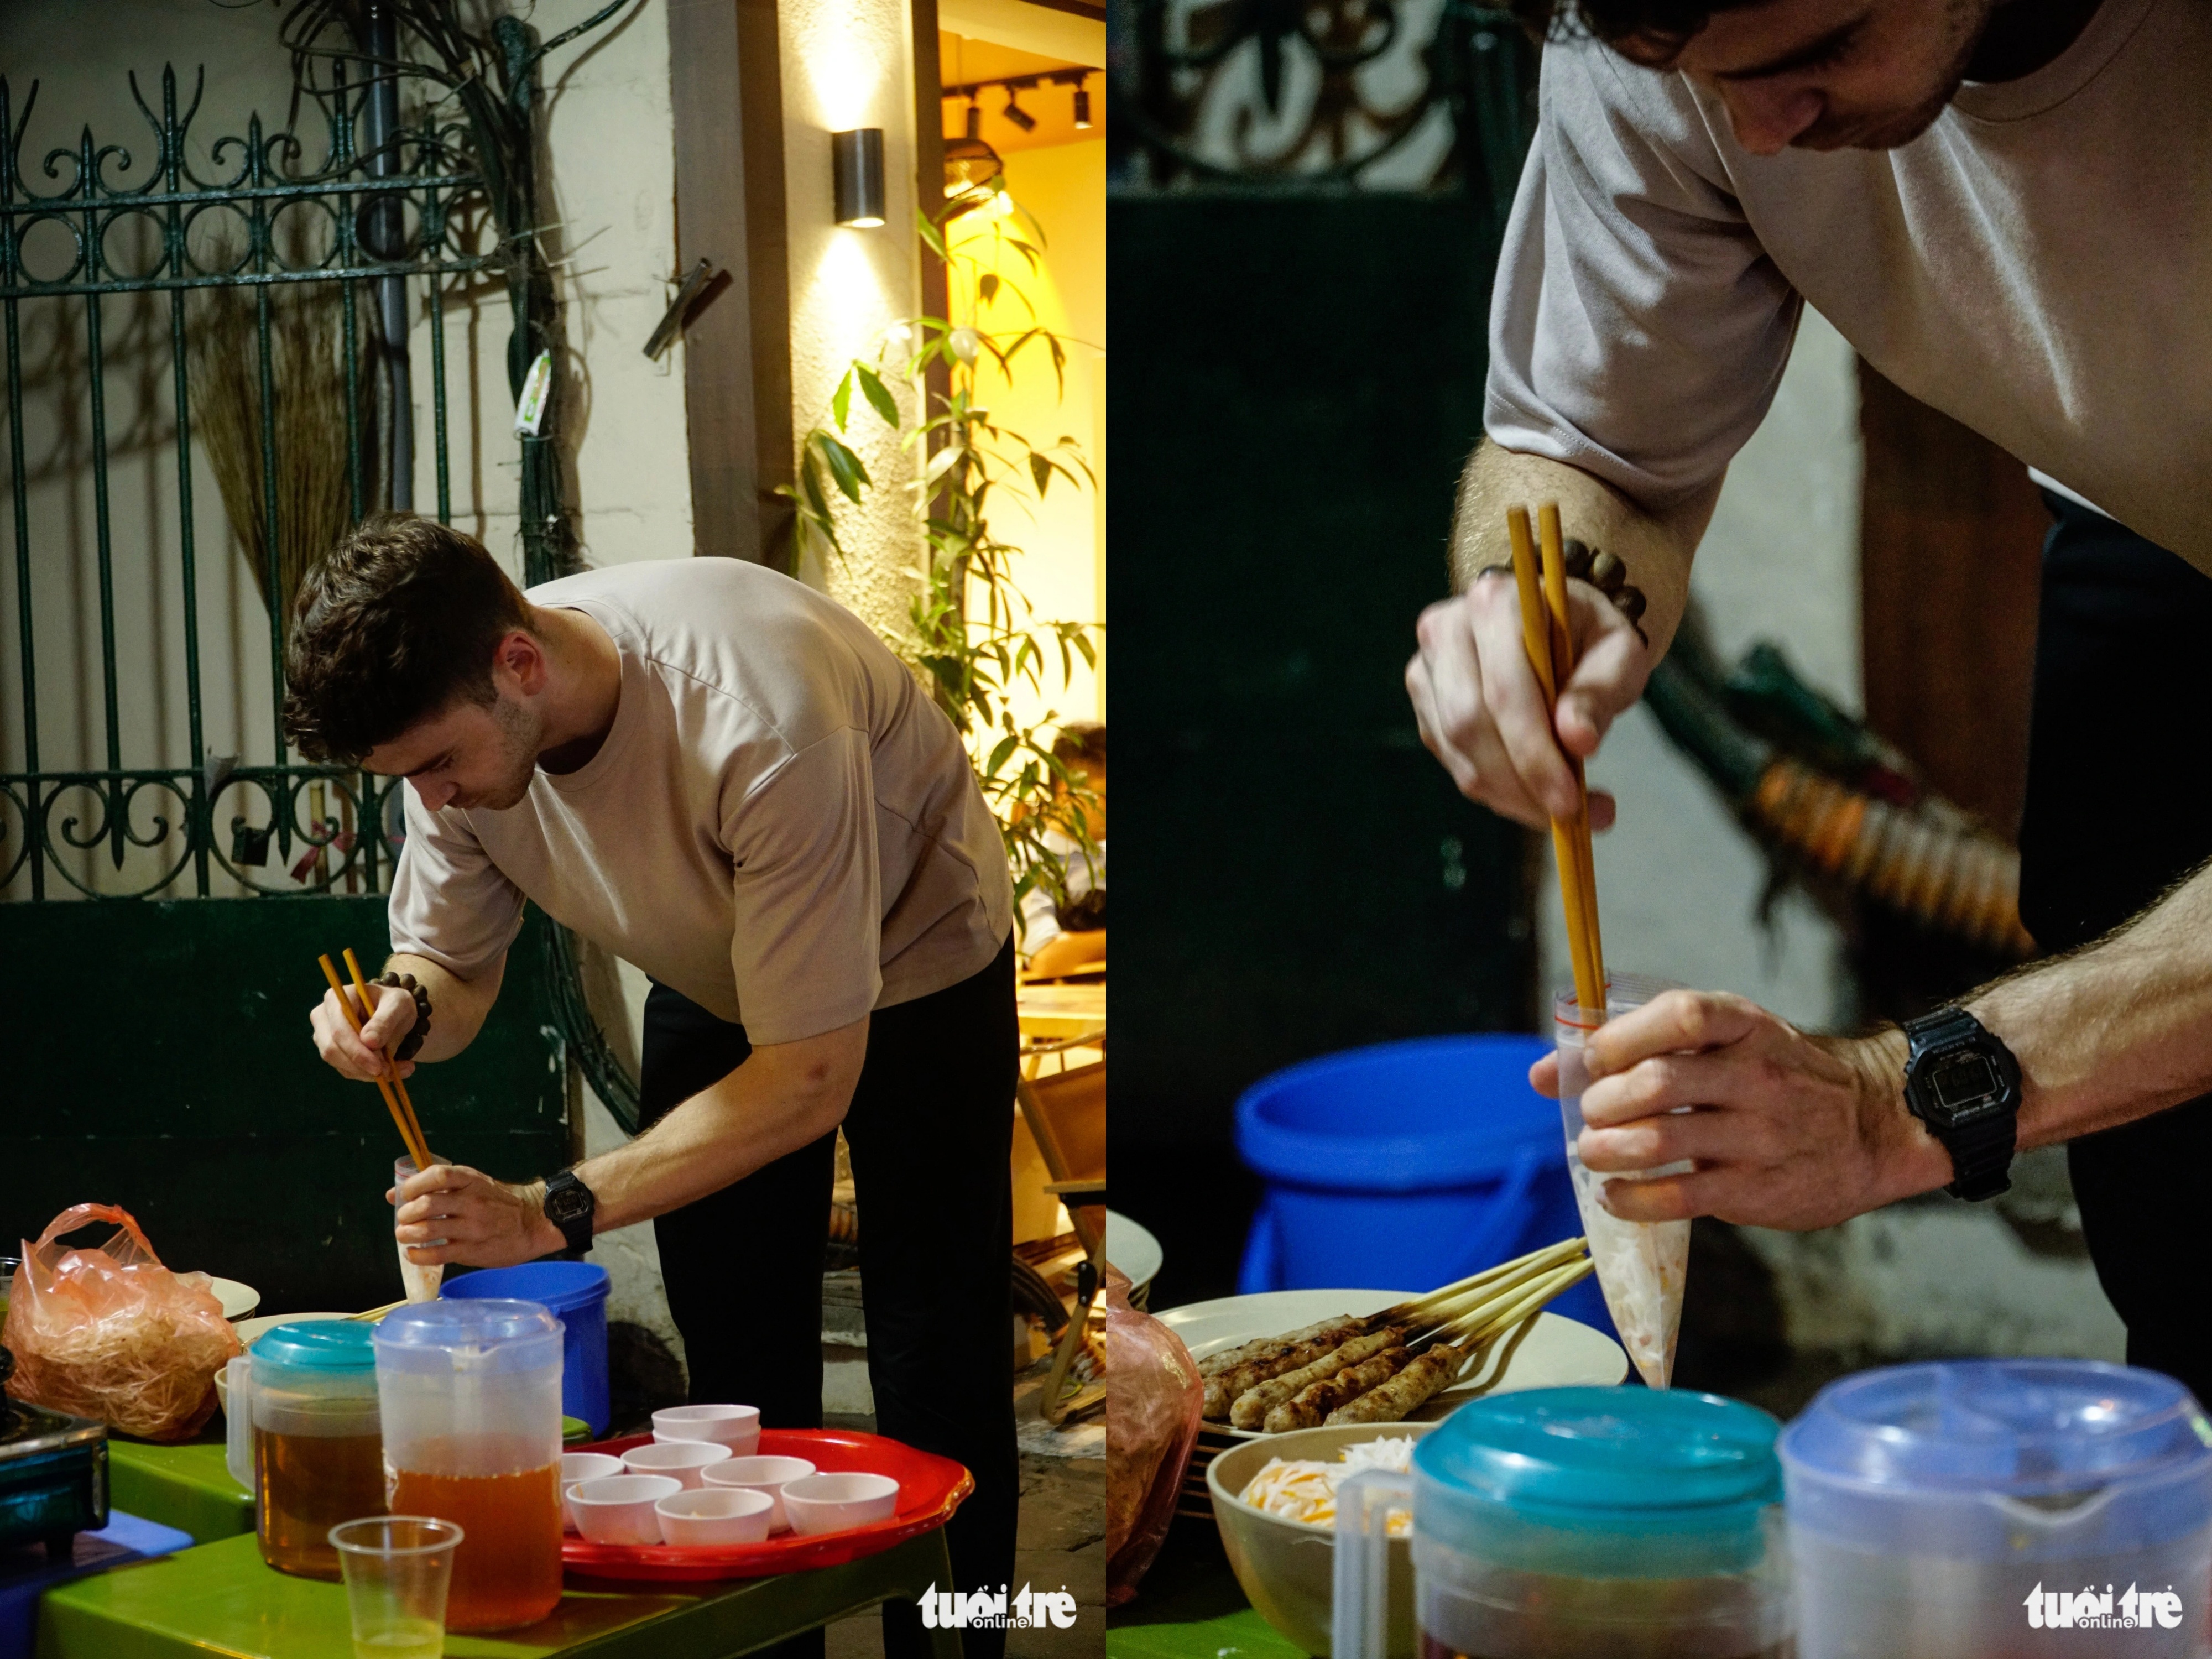 Moritz, a 28-year-old Swiss man, assists his girlfriend, Le Duyen, at her eatery on Phan Dinh Phung Street in Hanoi. Photo: Nguyen Hien / Tuoi Tre